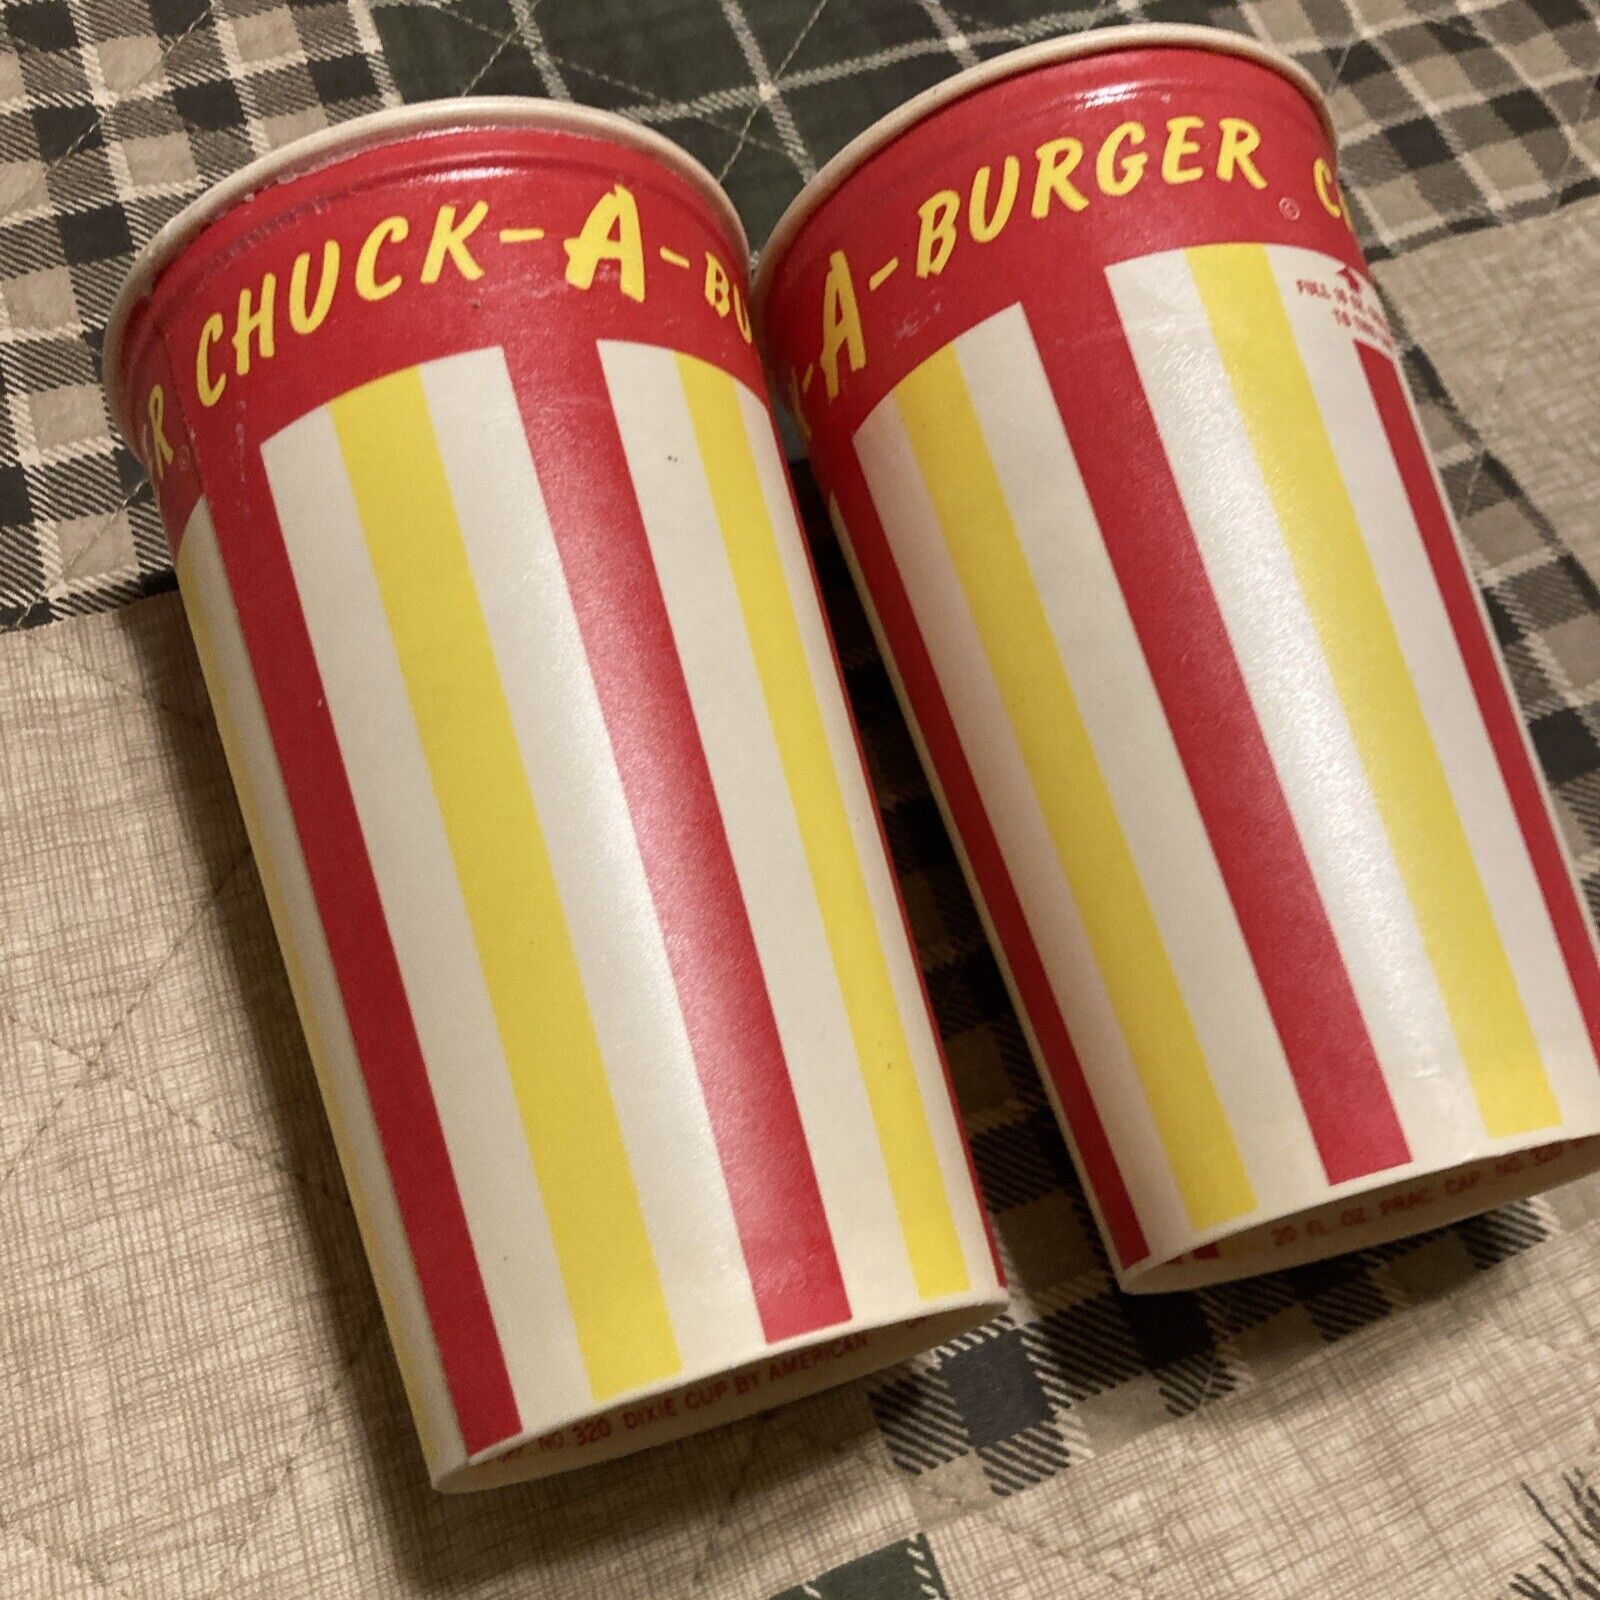 2 VINTAGE CHUCK-A-BURGER CUPS Wax Paper Hamburger Cup Drive In Restaurant Unused